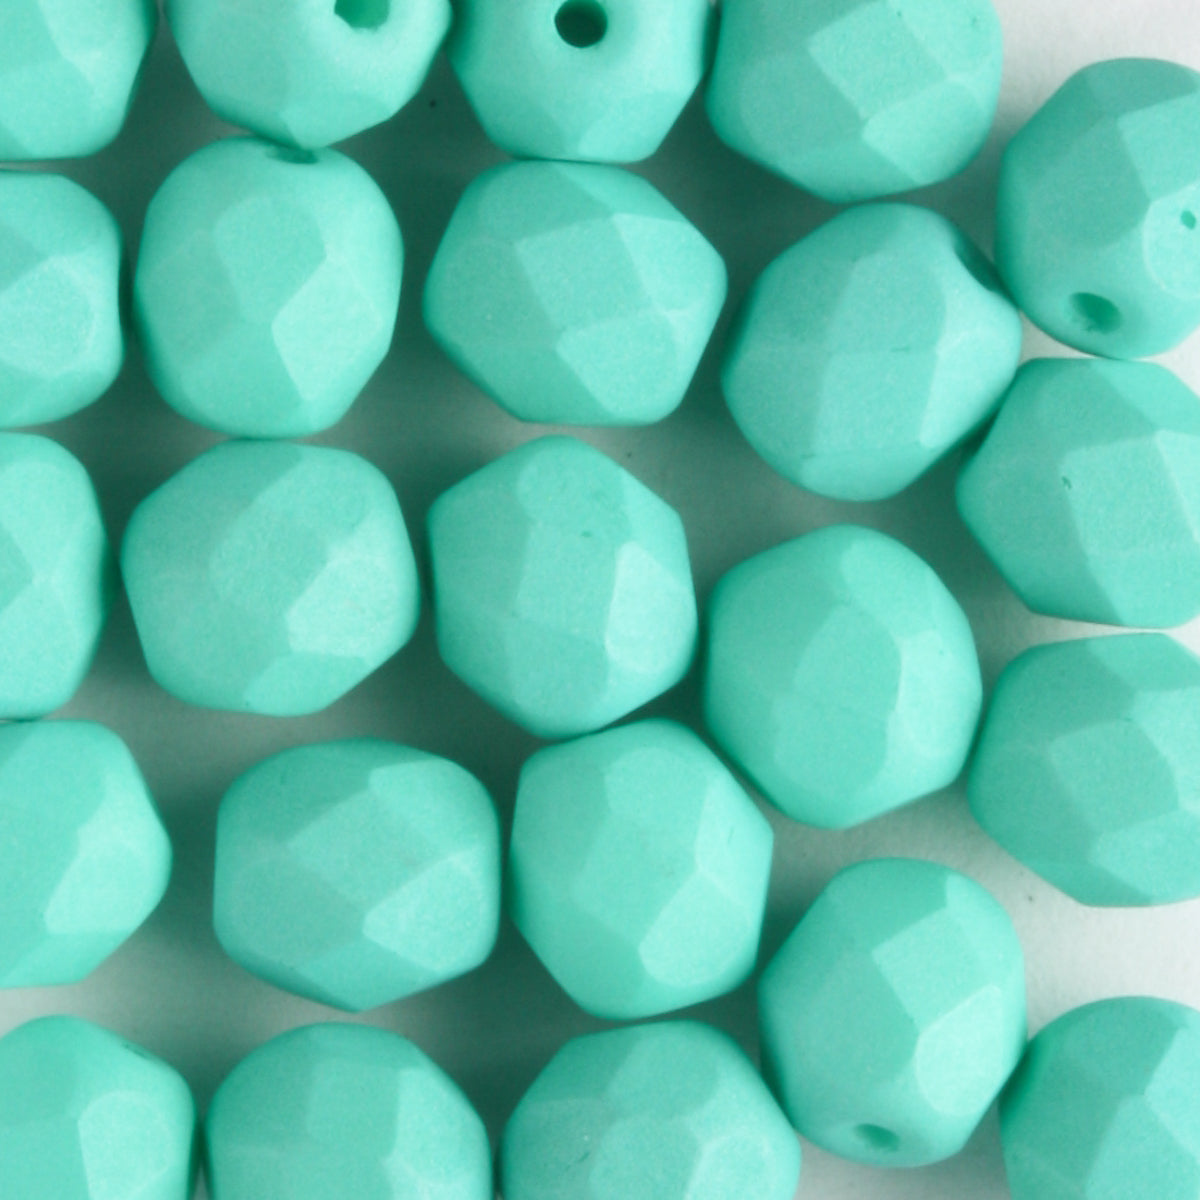 6mm Round Fire Polish Saturated Teal - 25 beads